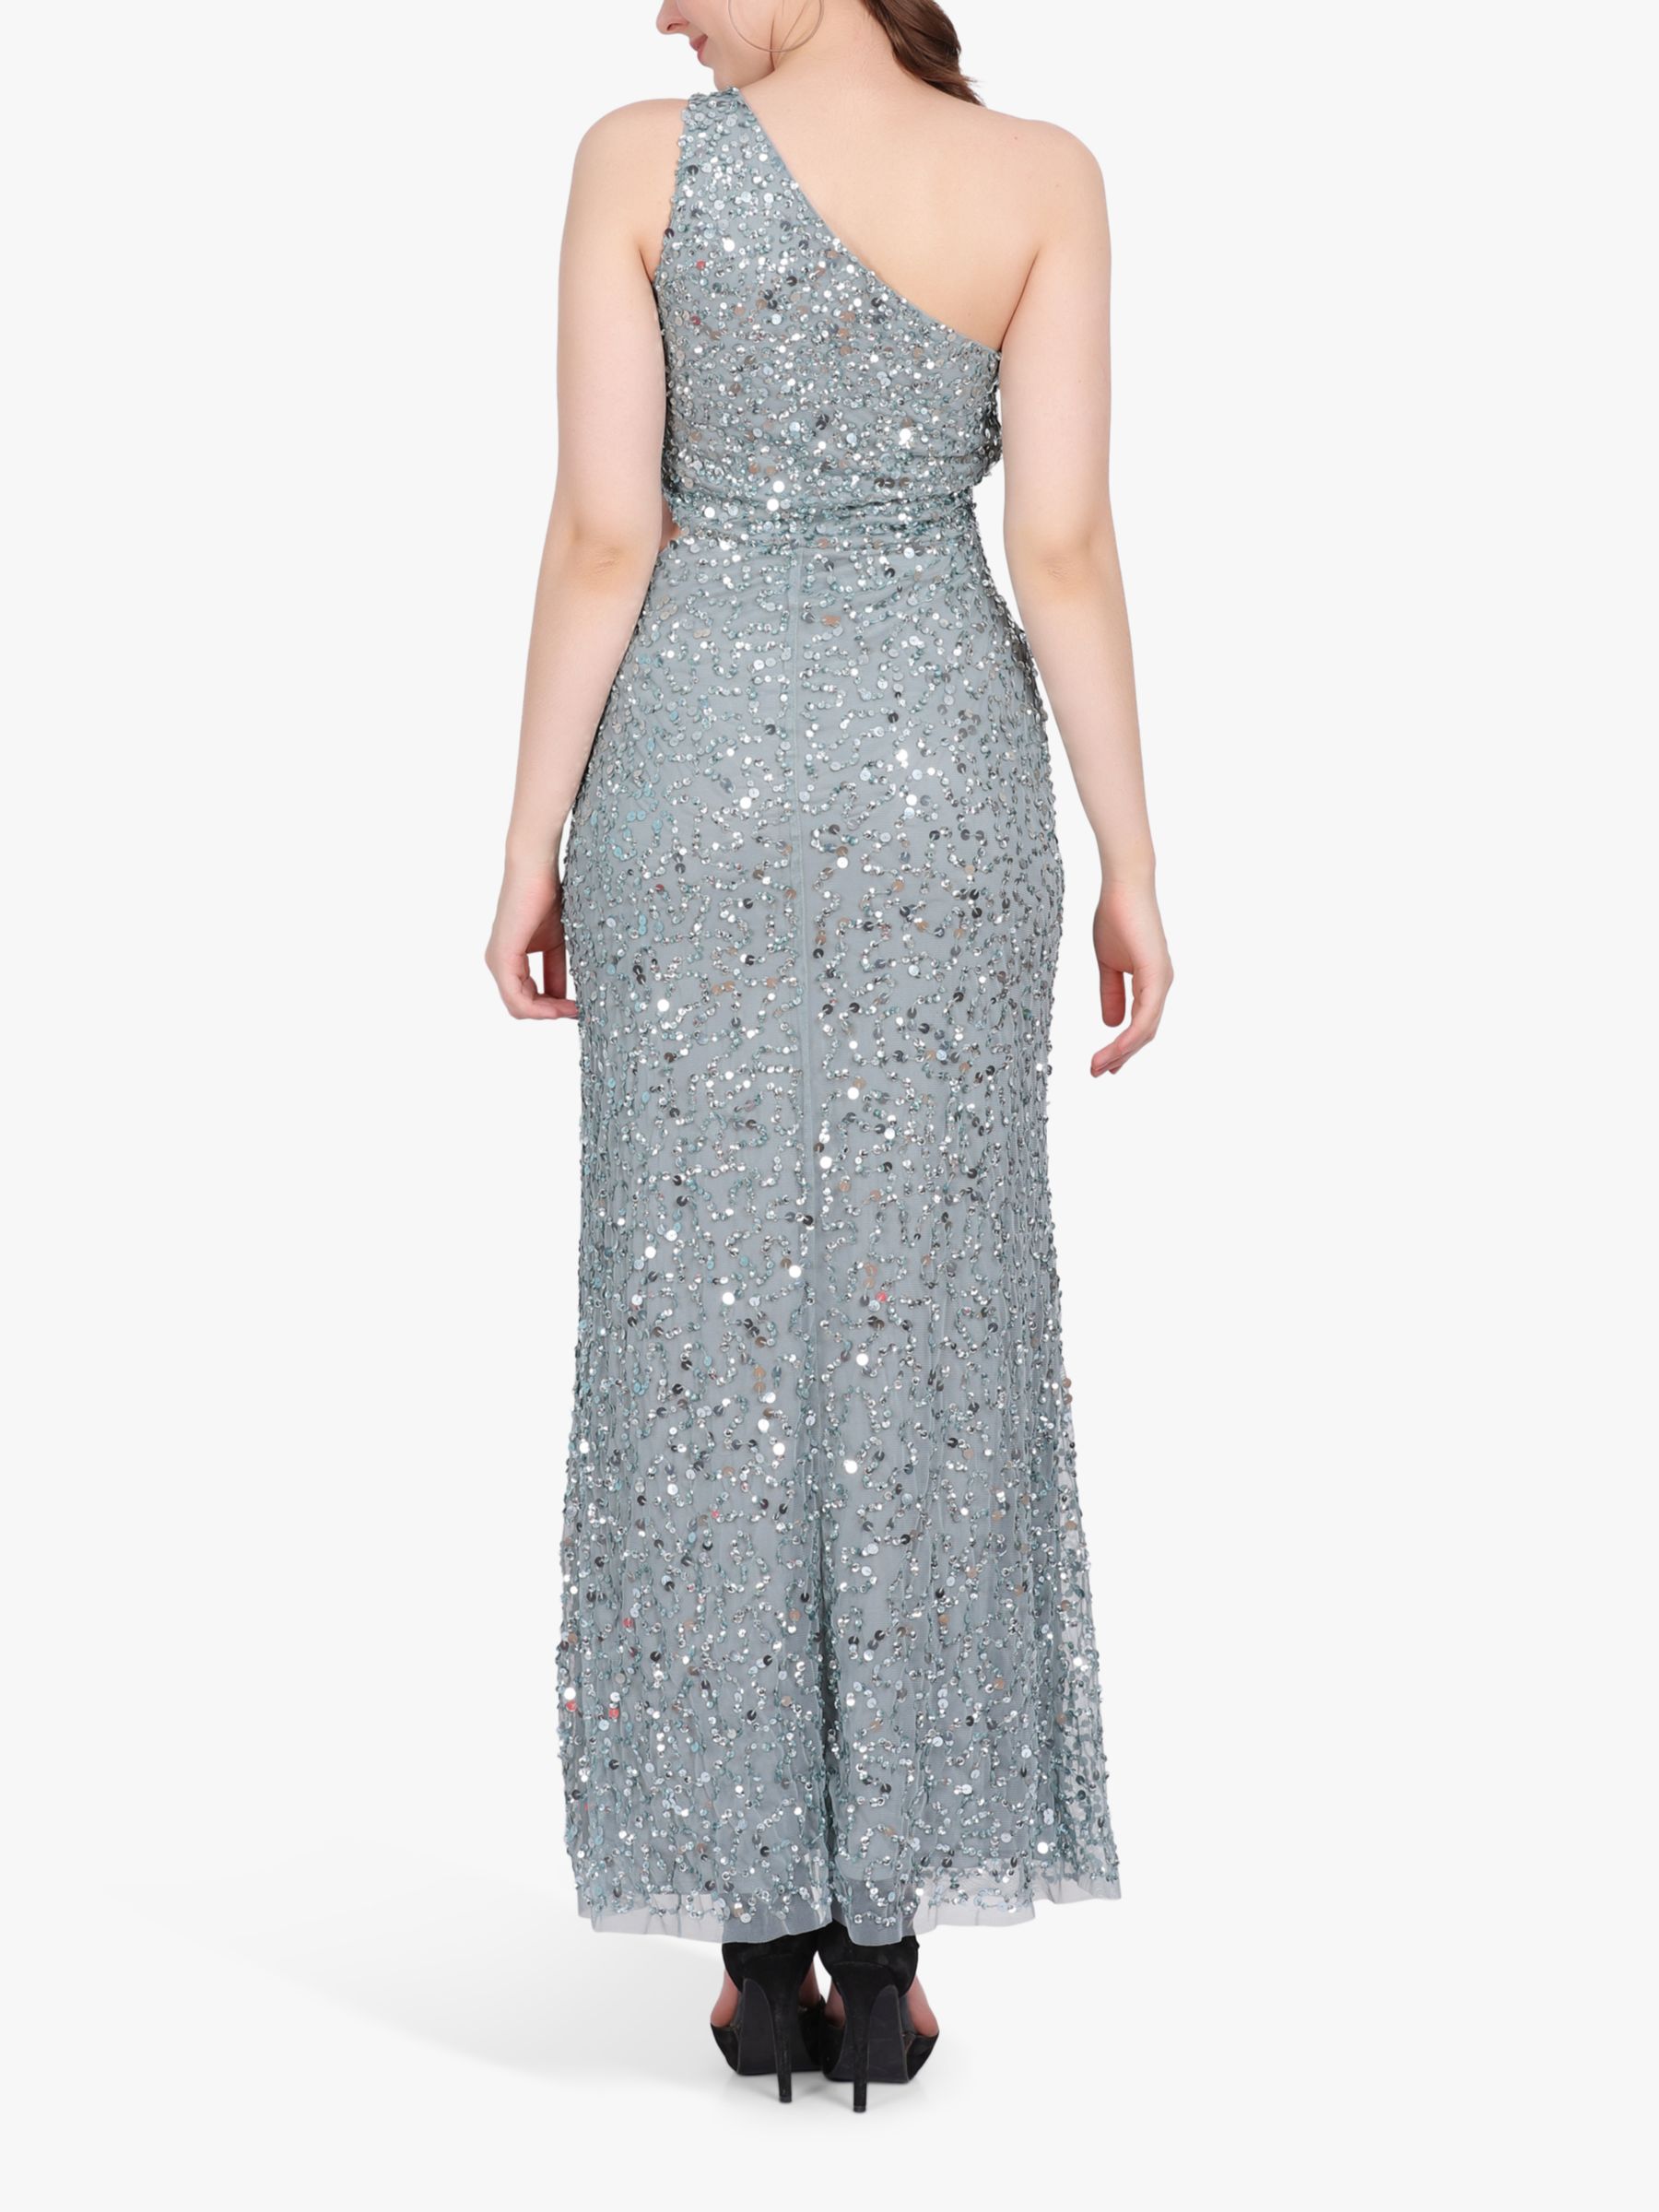 Lace & Beads Naeve Sequin One Shoulder Maxi Dress, Teal at John Lewis ...